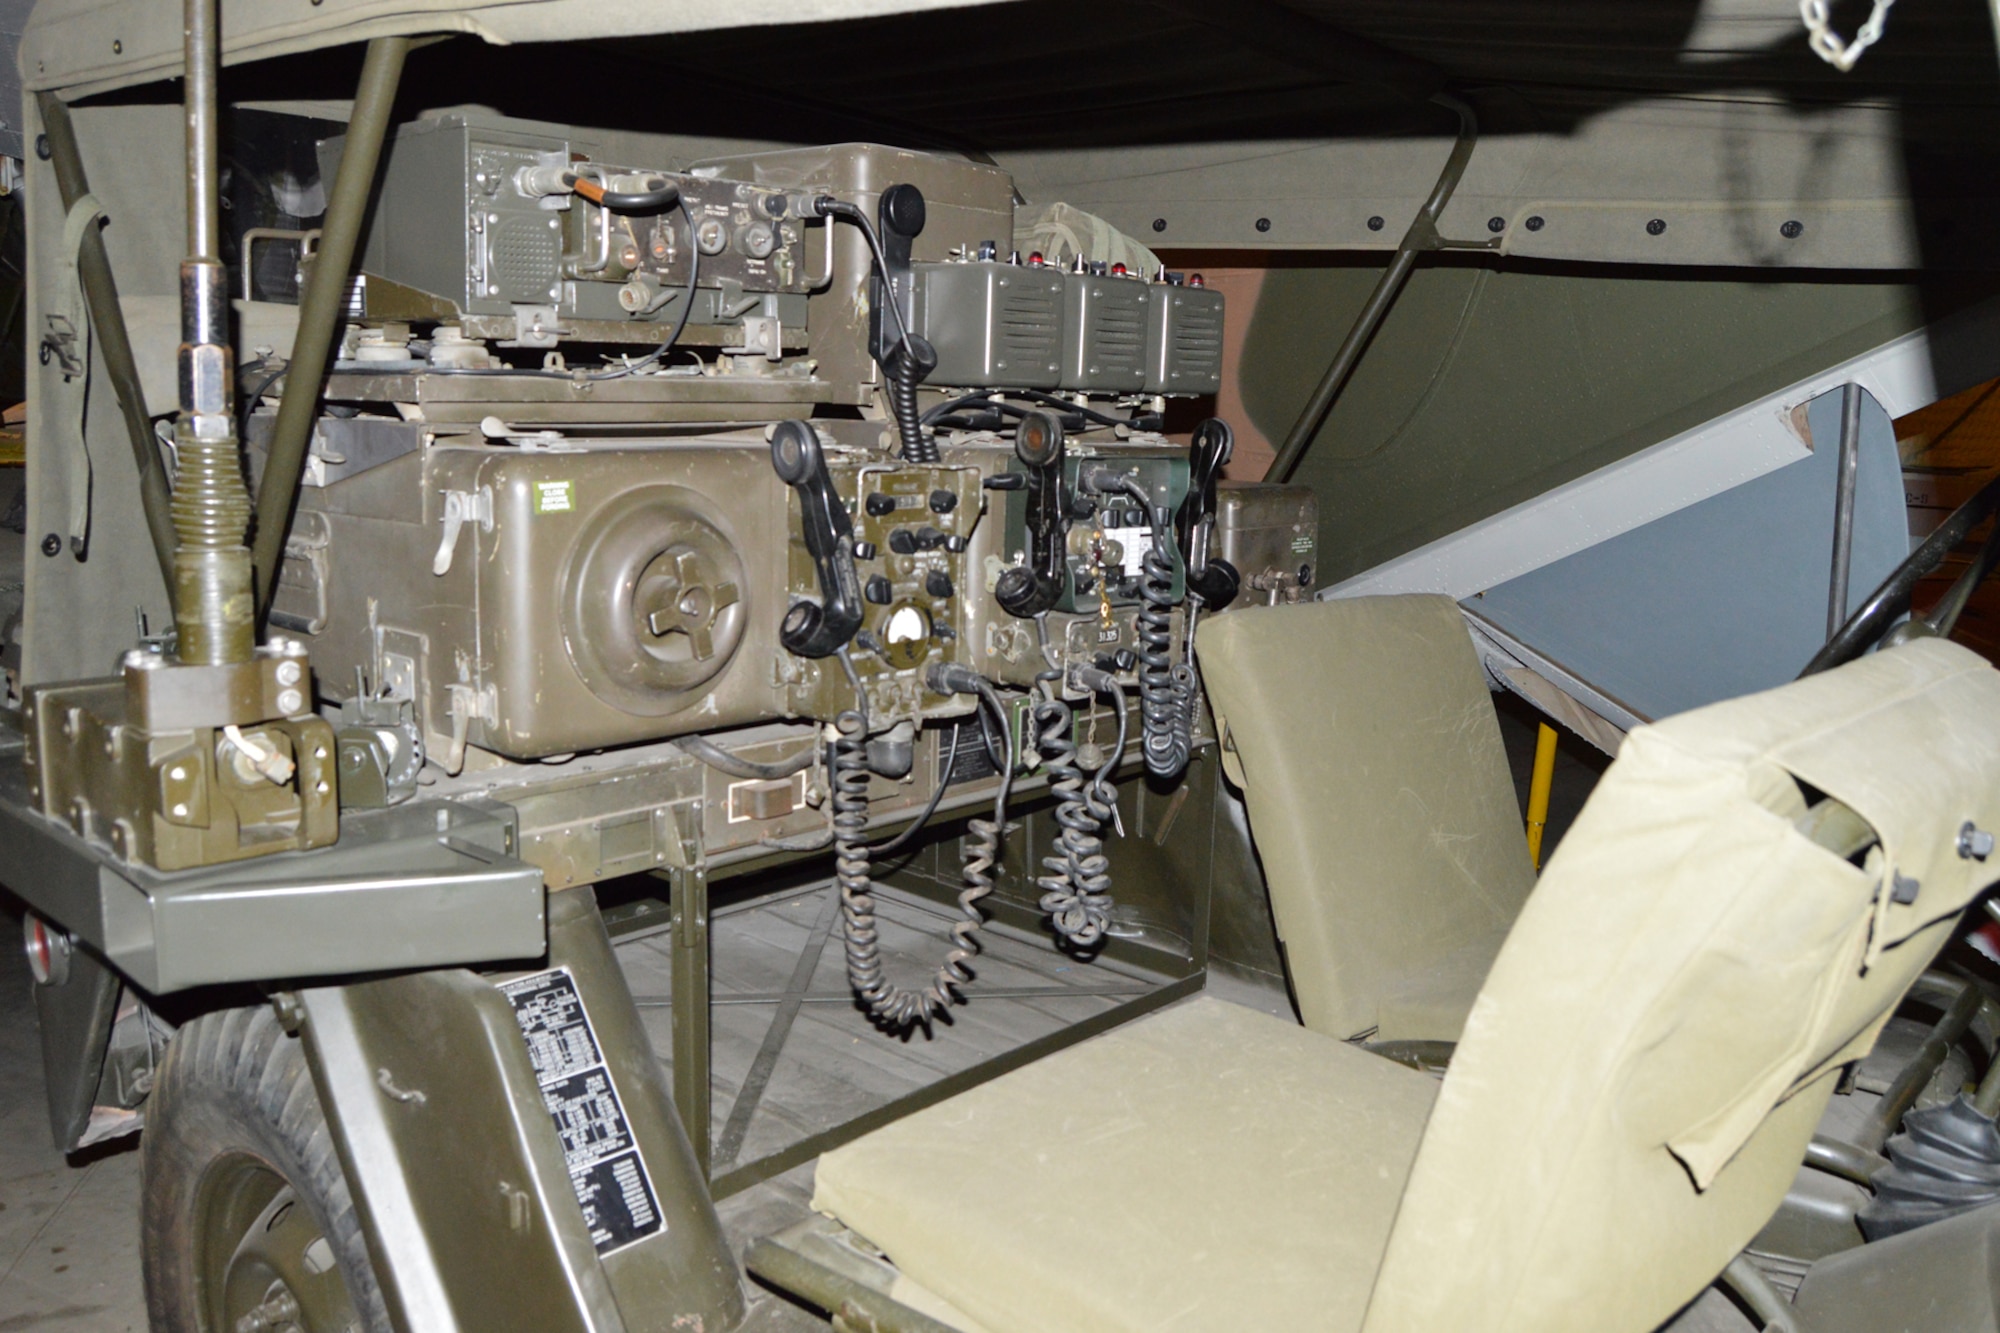 DAYTON, Ohio -- Interior of the AN/MRC-108 Communication System on display in the Southeast Asia War Gallery at the National Museum of the U.S. Air Force. (U.S. Air Force photo) 
